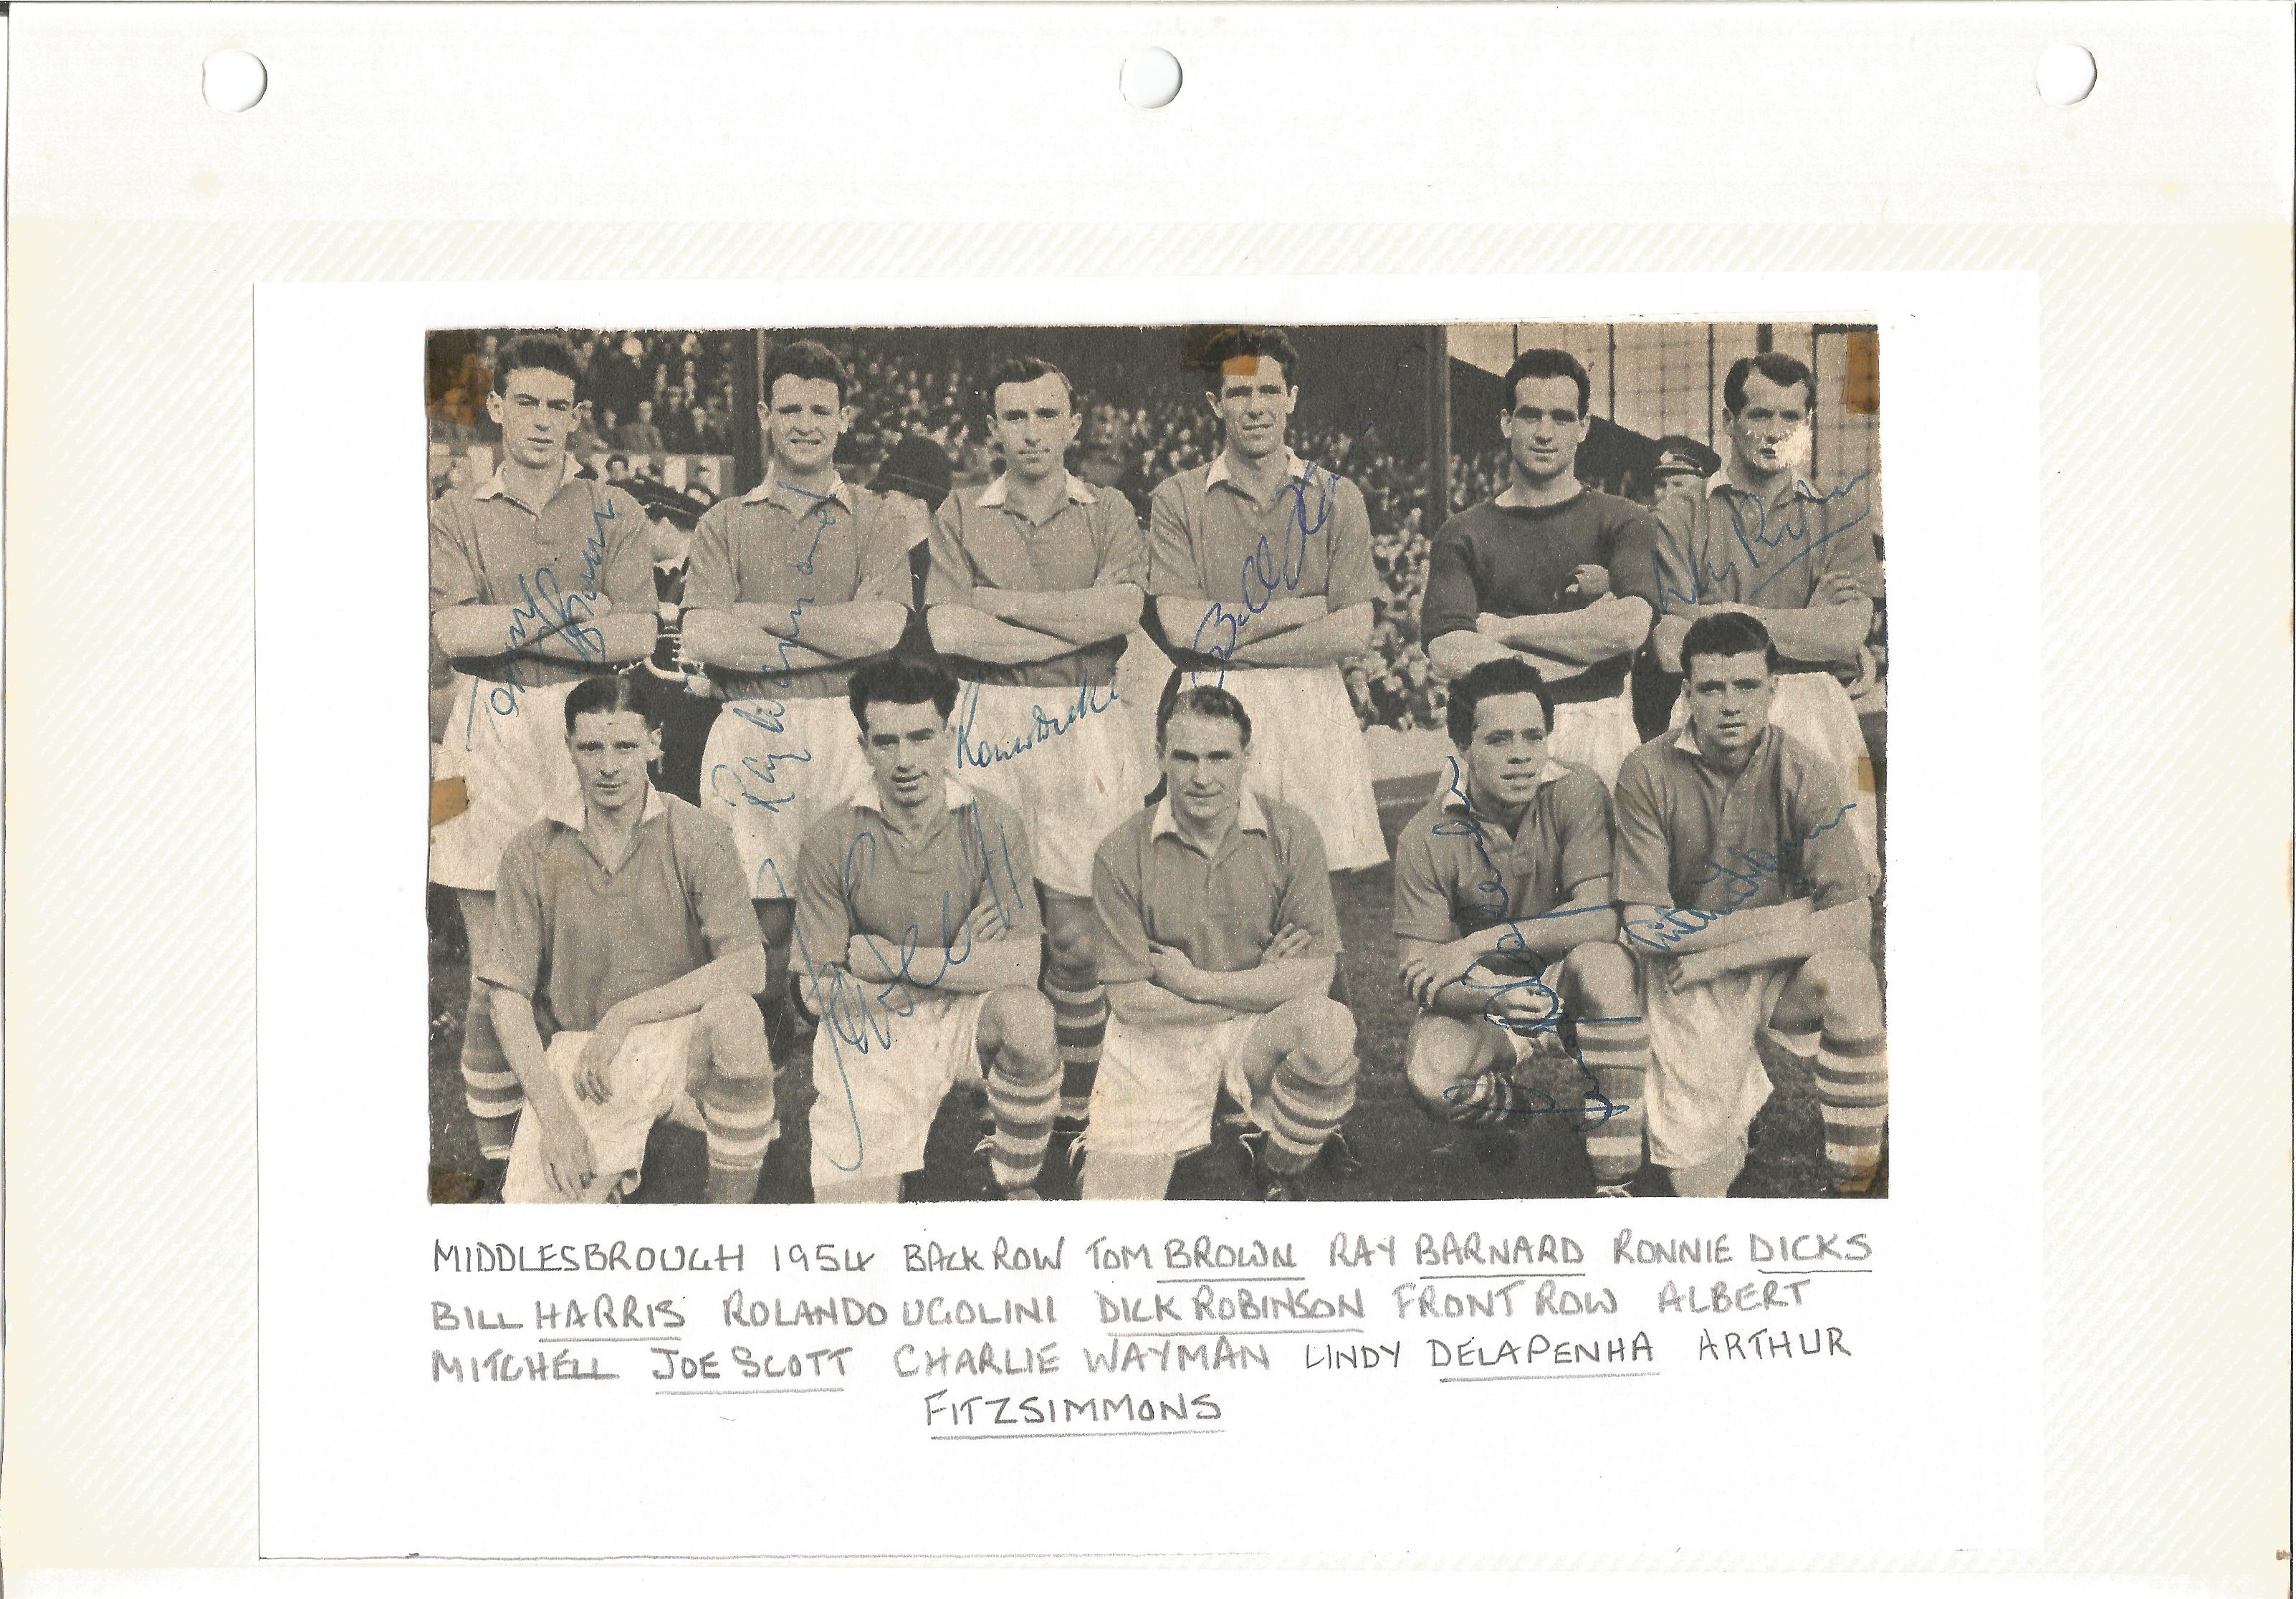 Football vintage team newspaper photo Middlesbrough 1954 8x6 fixed to album sleeve signed by team